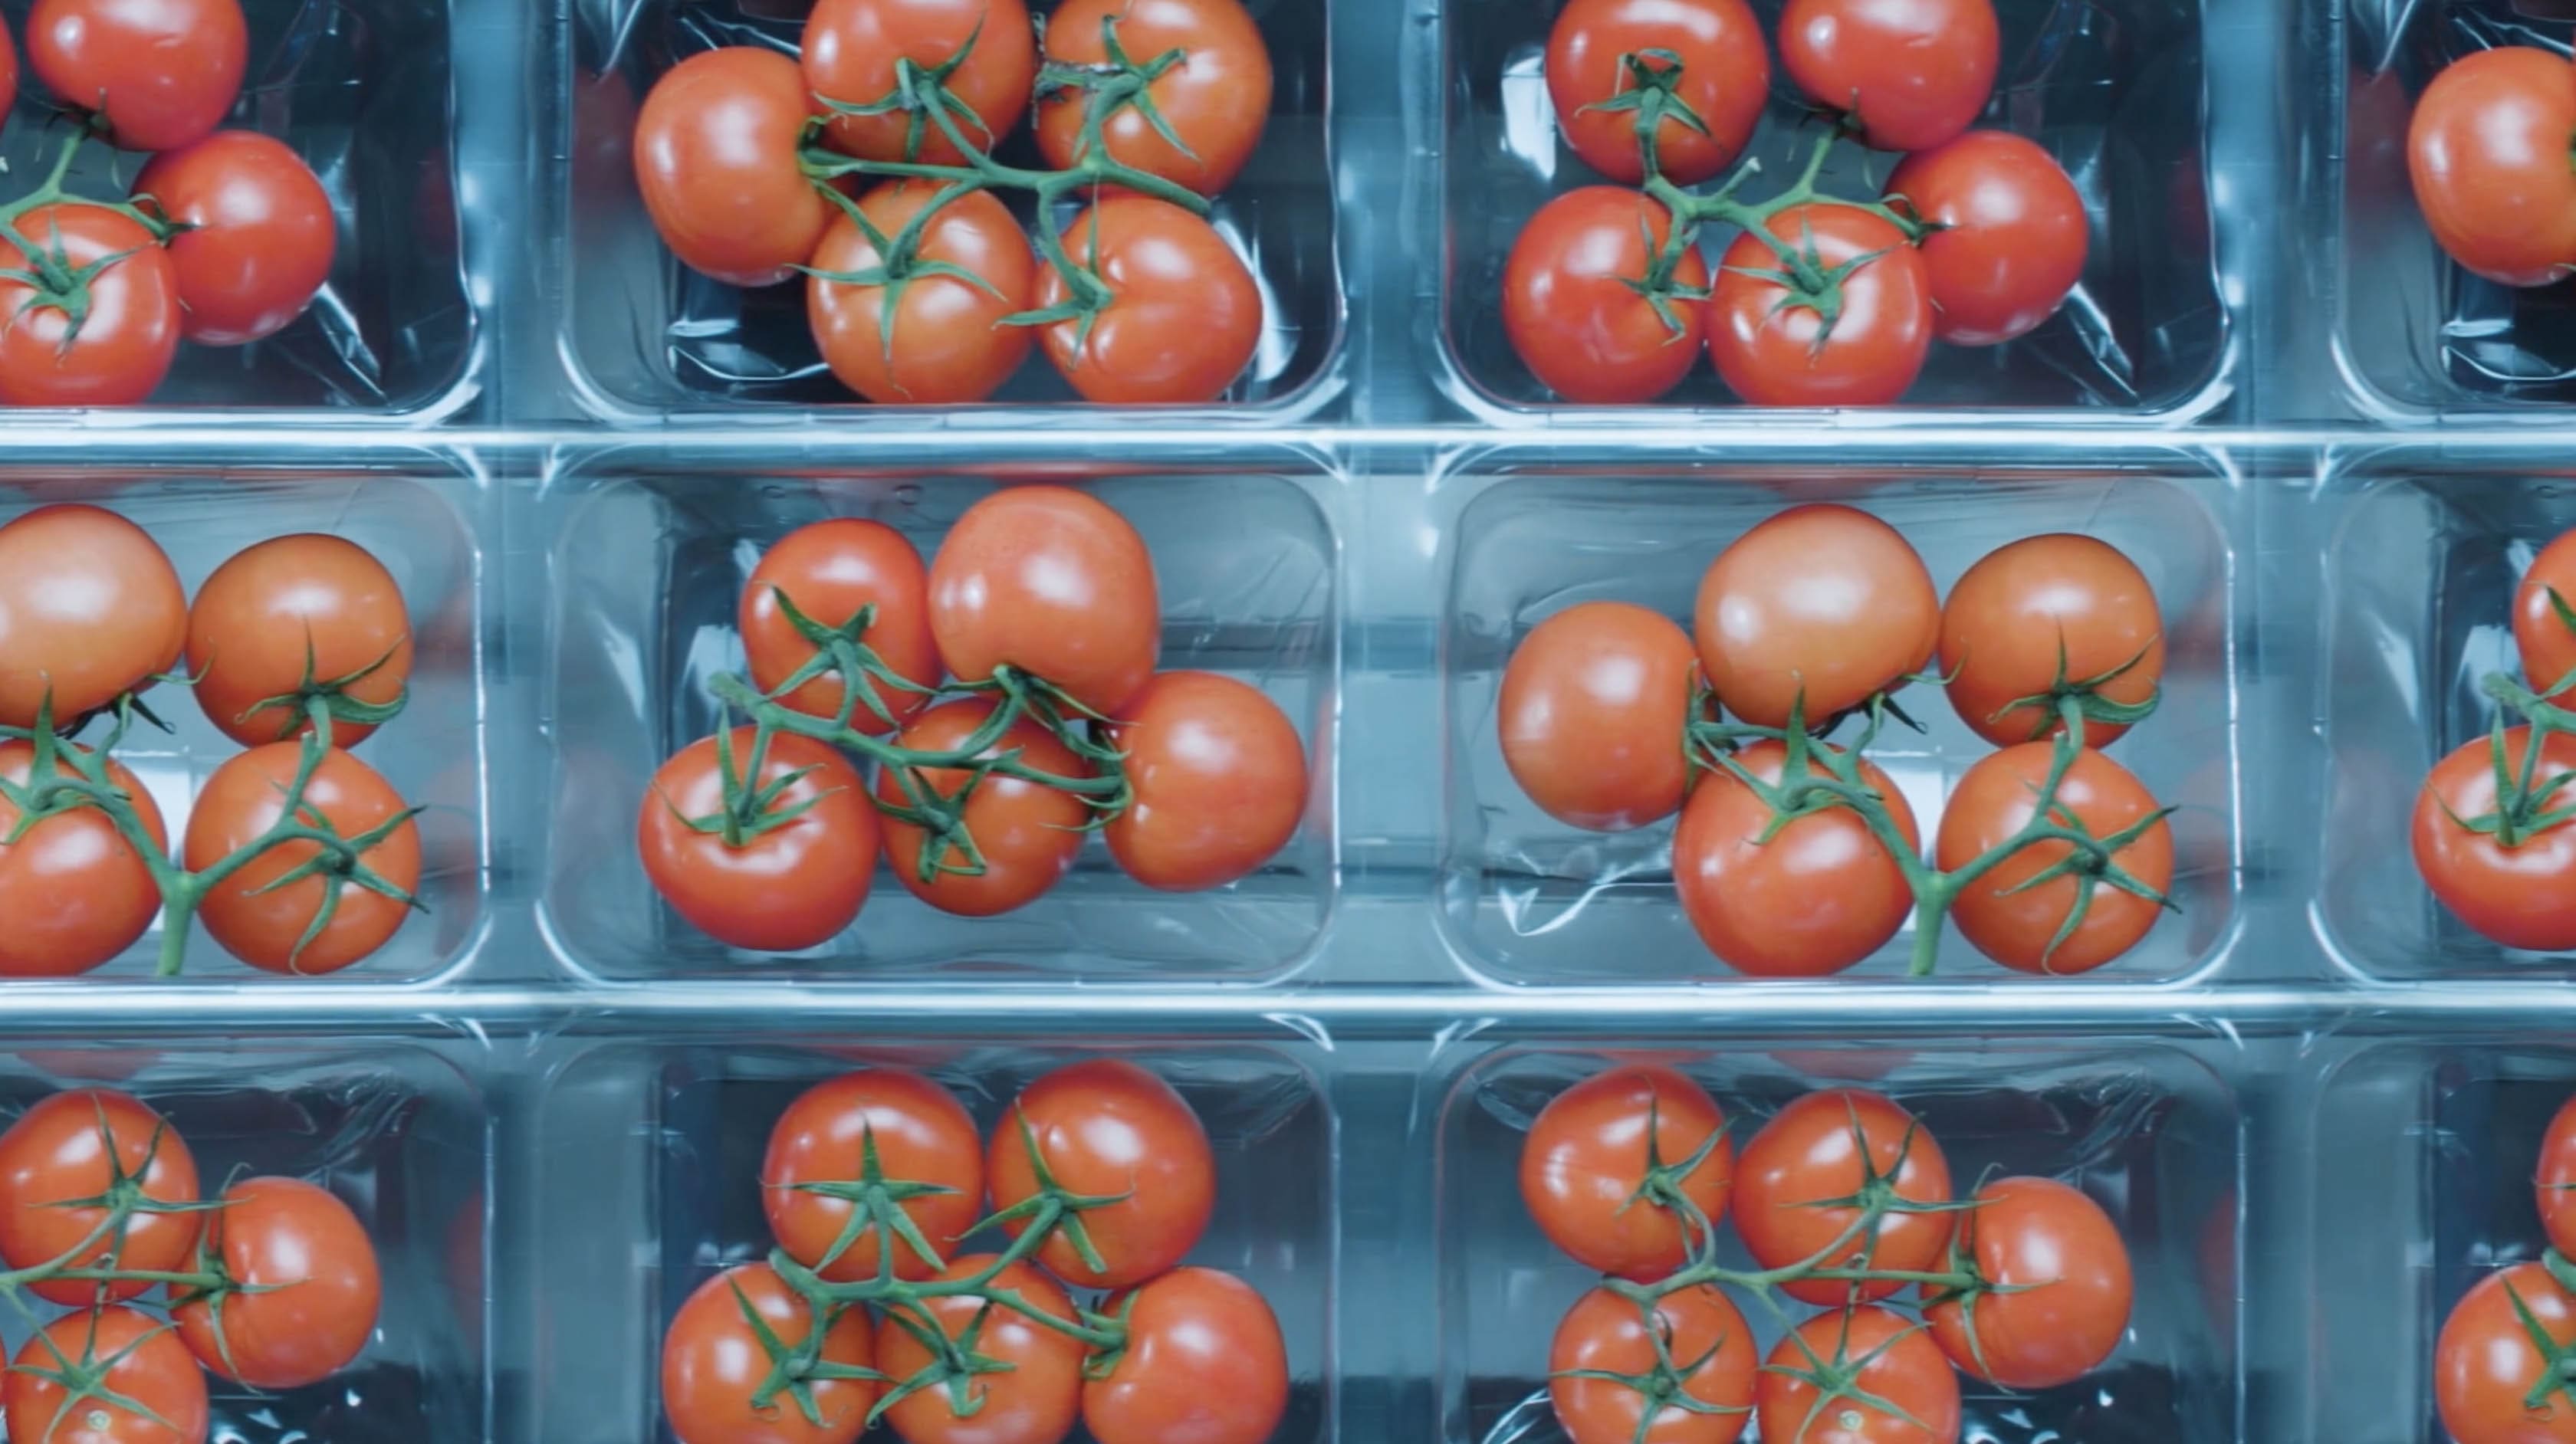 This image shows various packages of tomatoes for pick n pack film